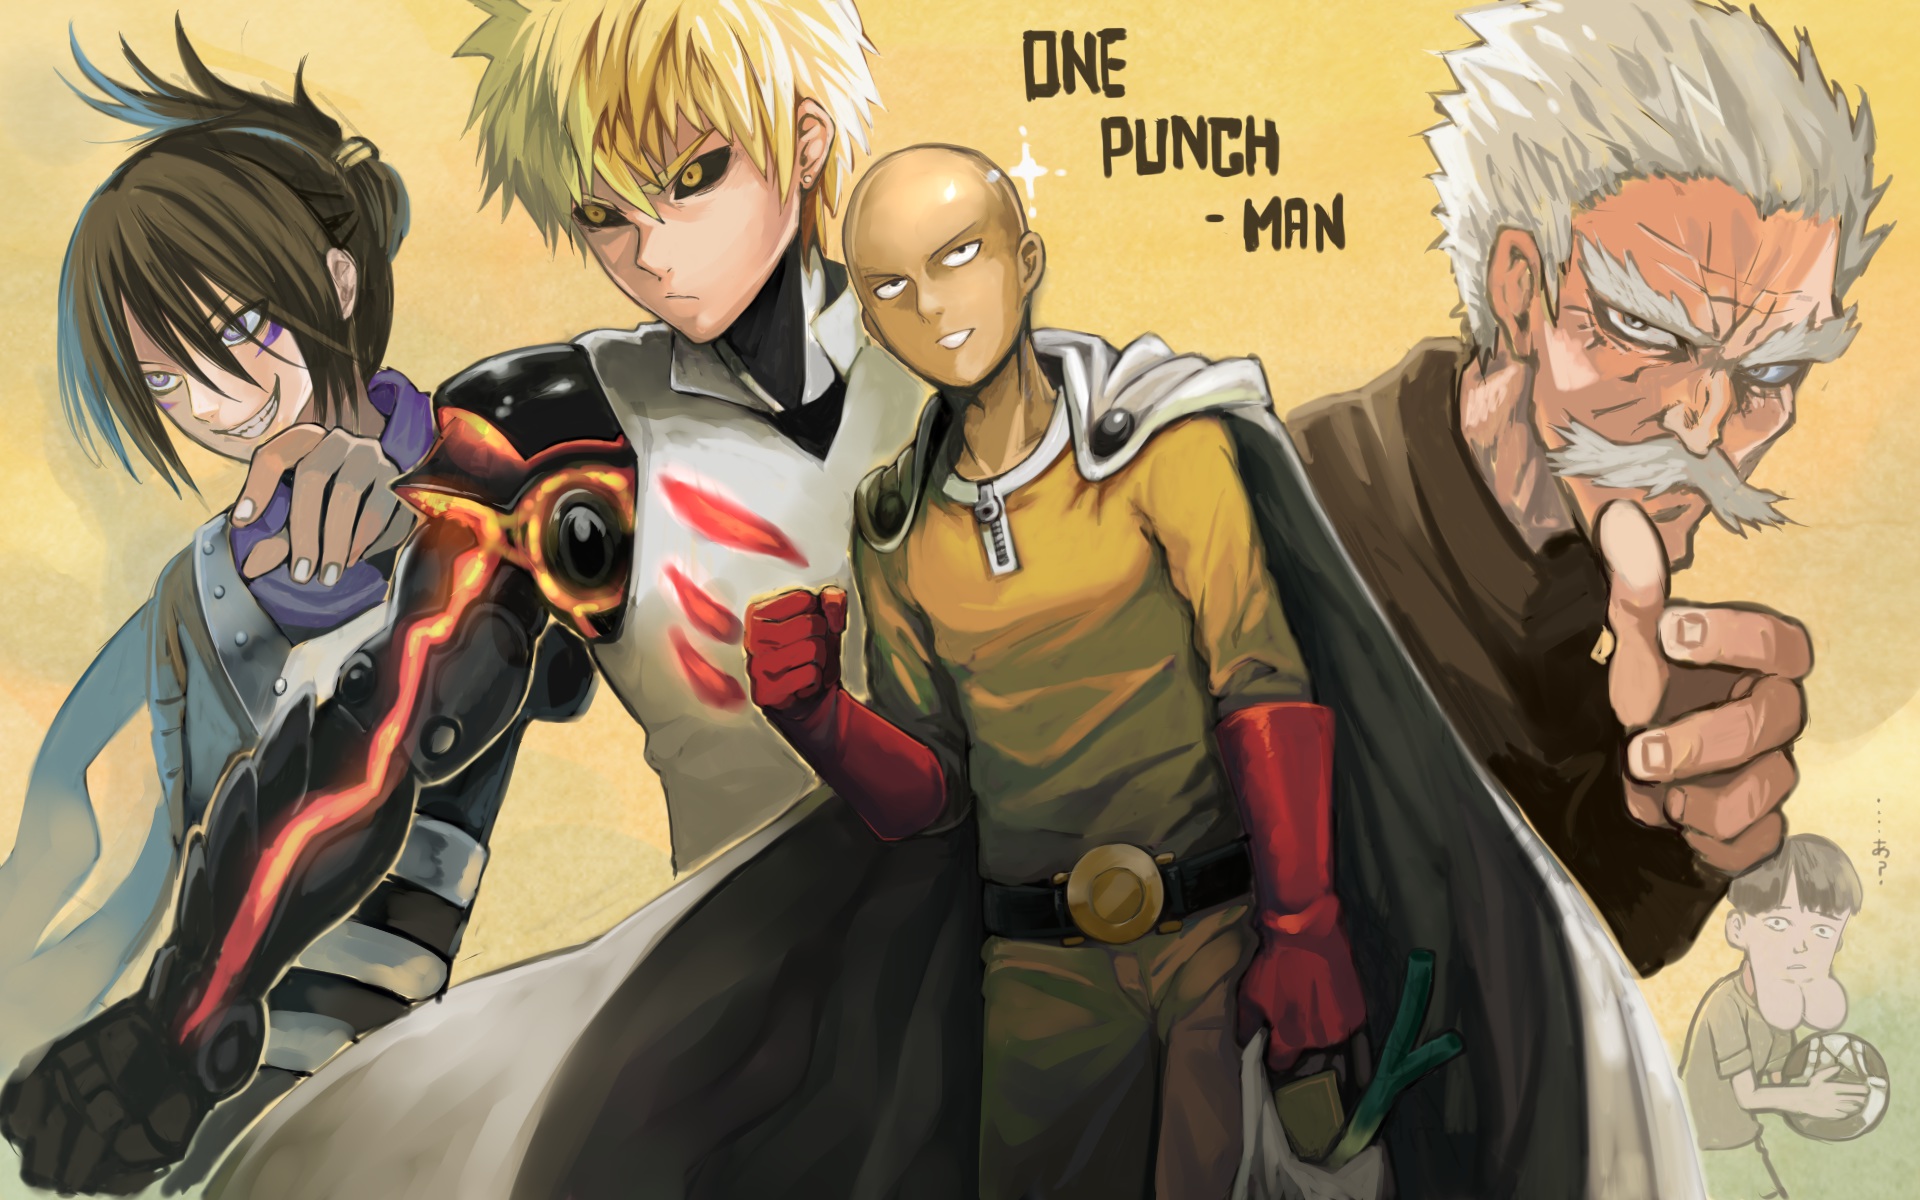 One Punch Man Sonic One Punch Man Genos One Punch Man Saitama One Punch Man Bang One Punch Man 1920x1200